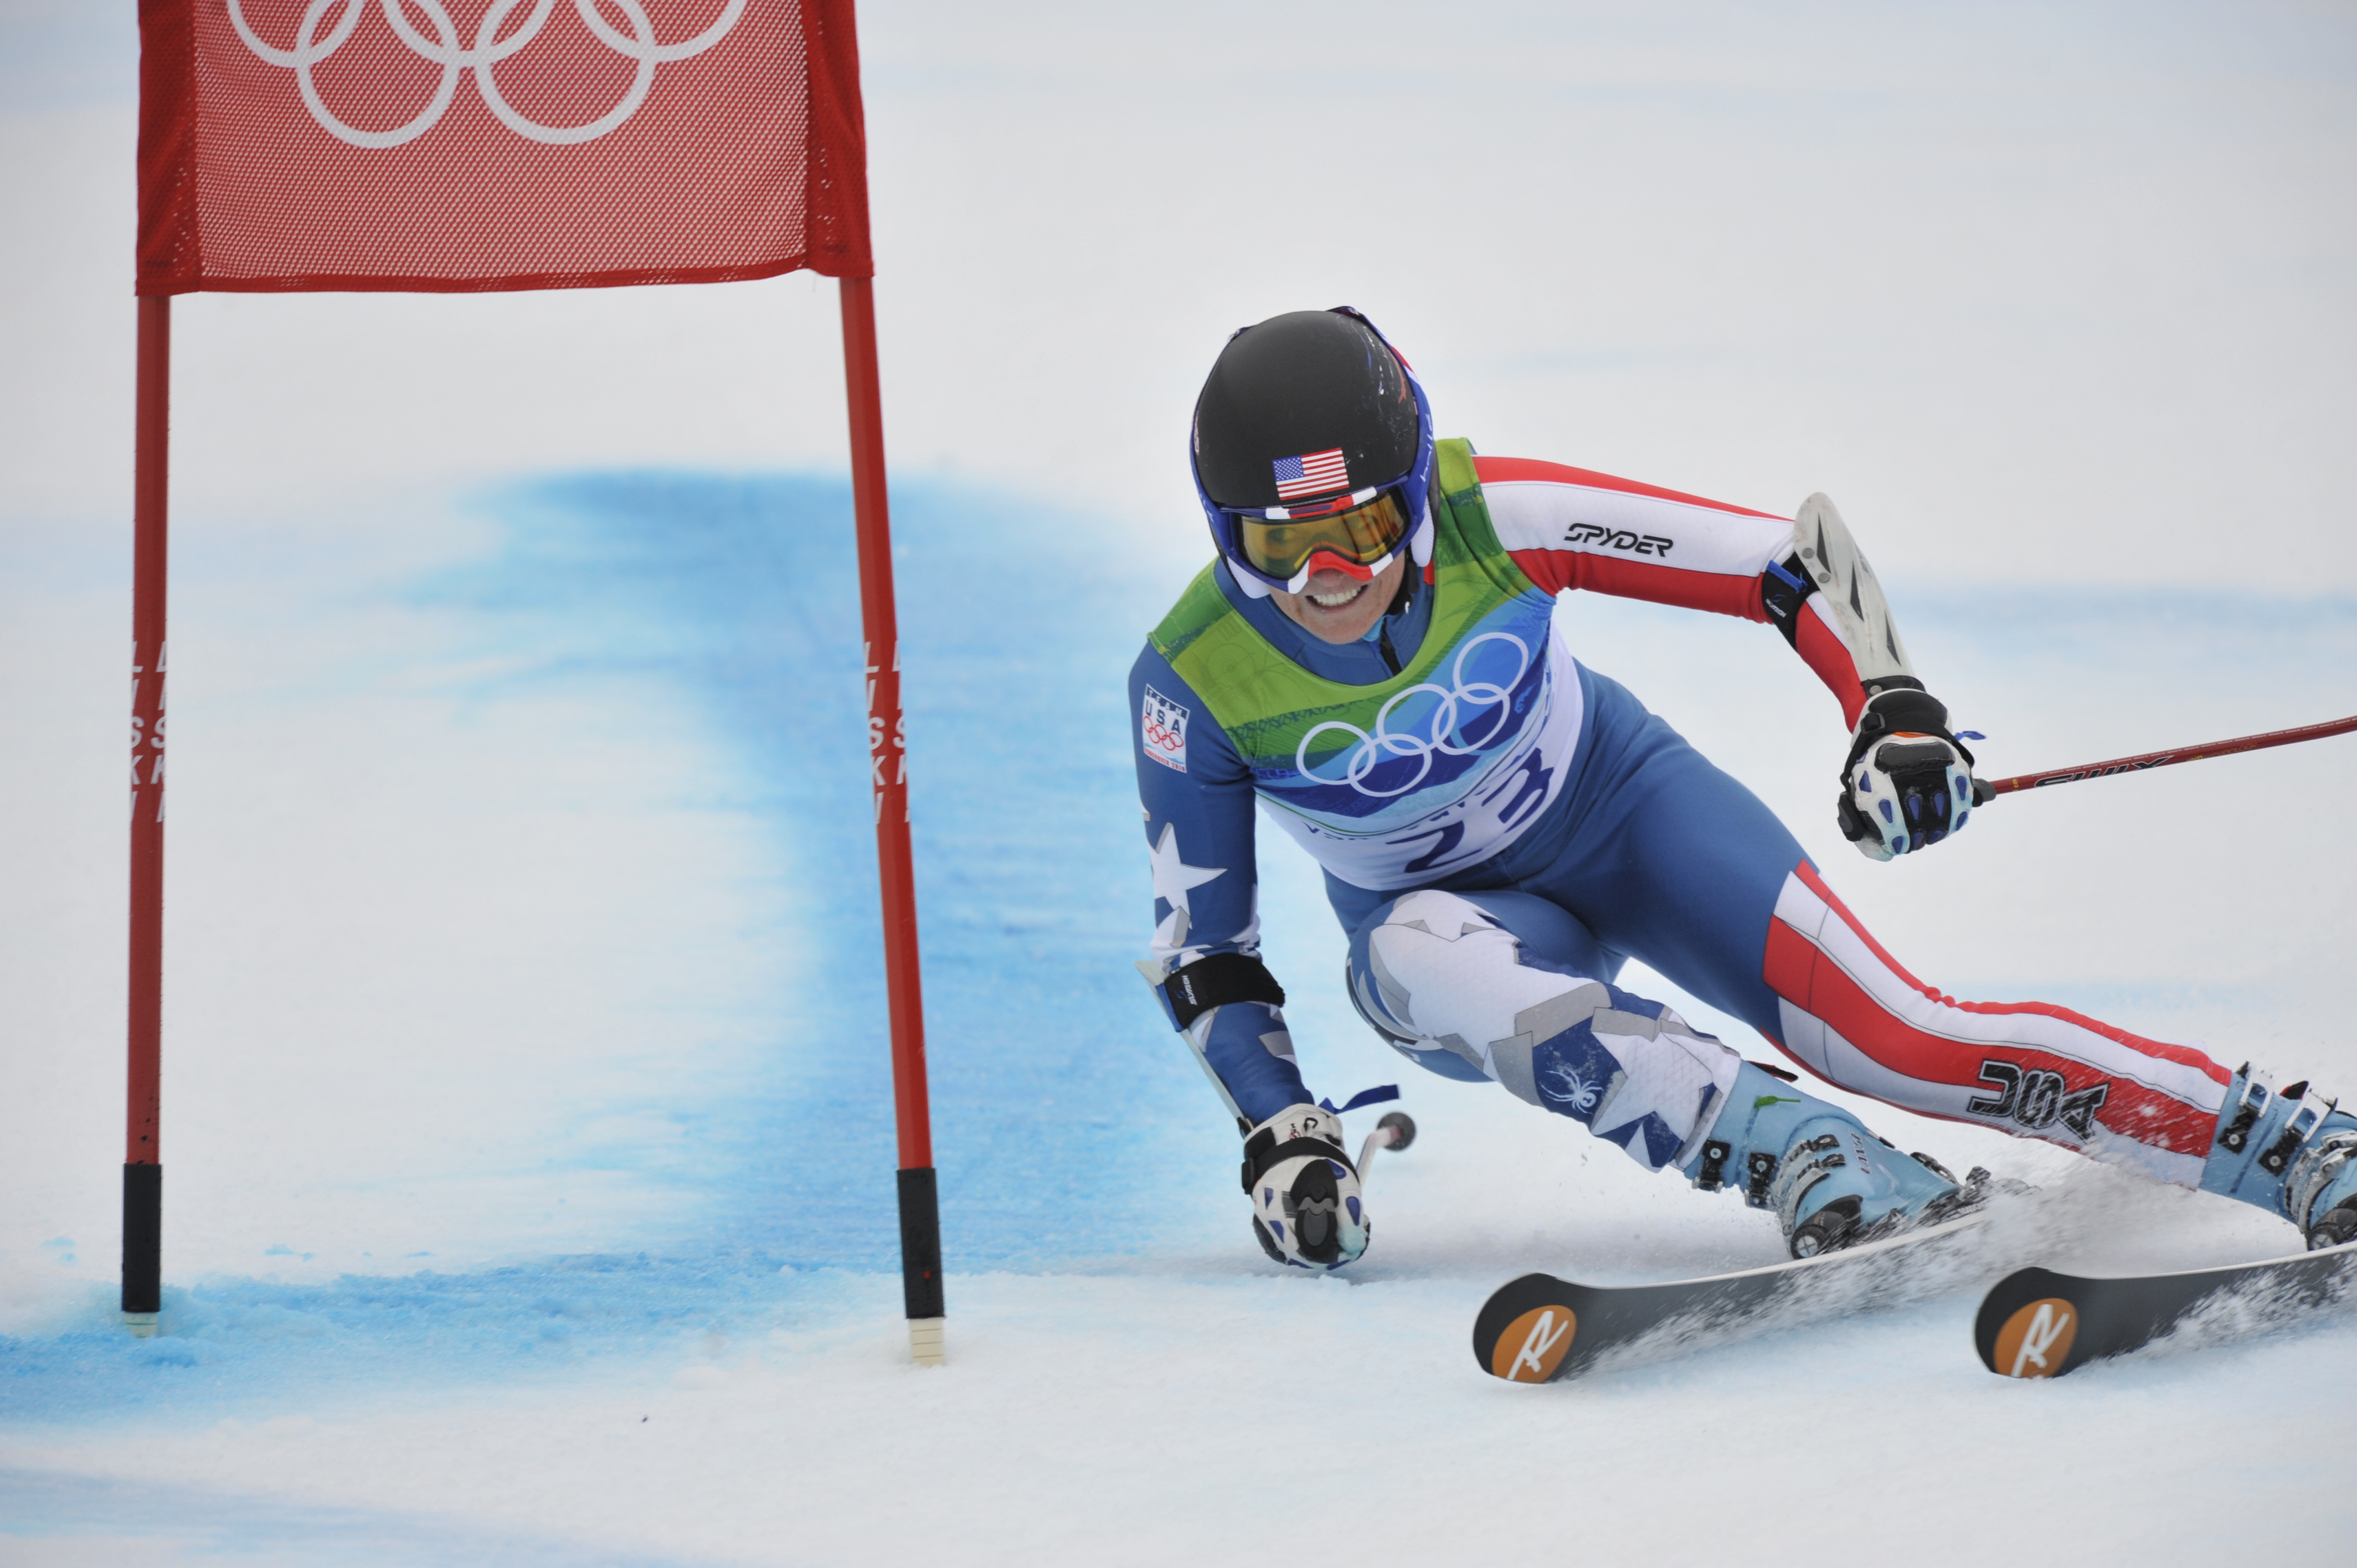 We’ve ranked all 21 Winter Olympic sports from easiest to hardest For